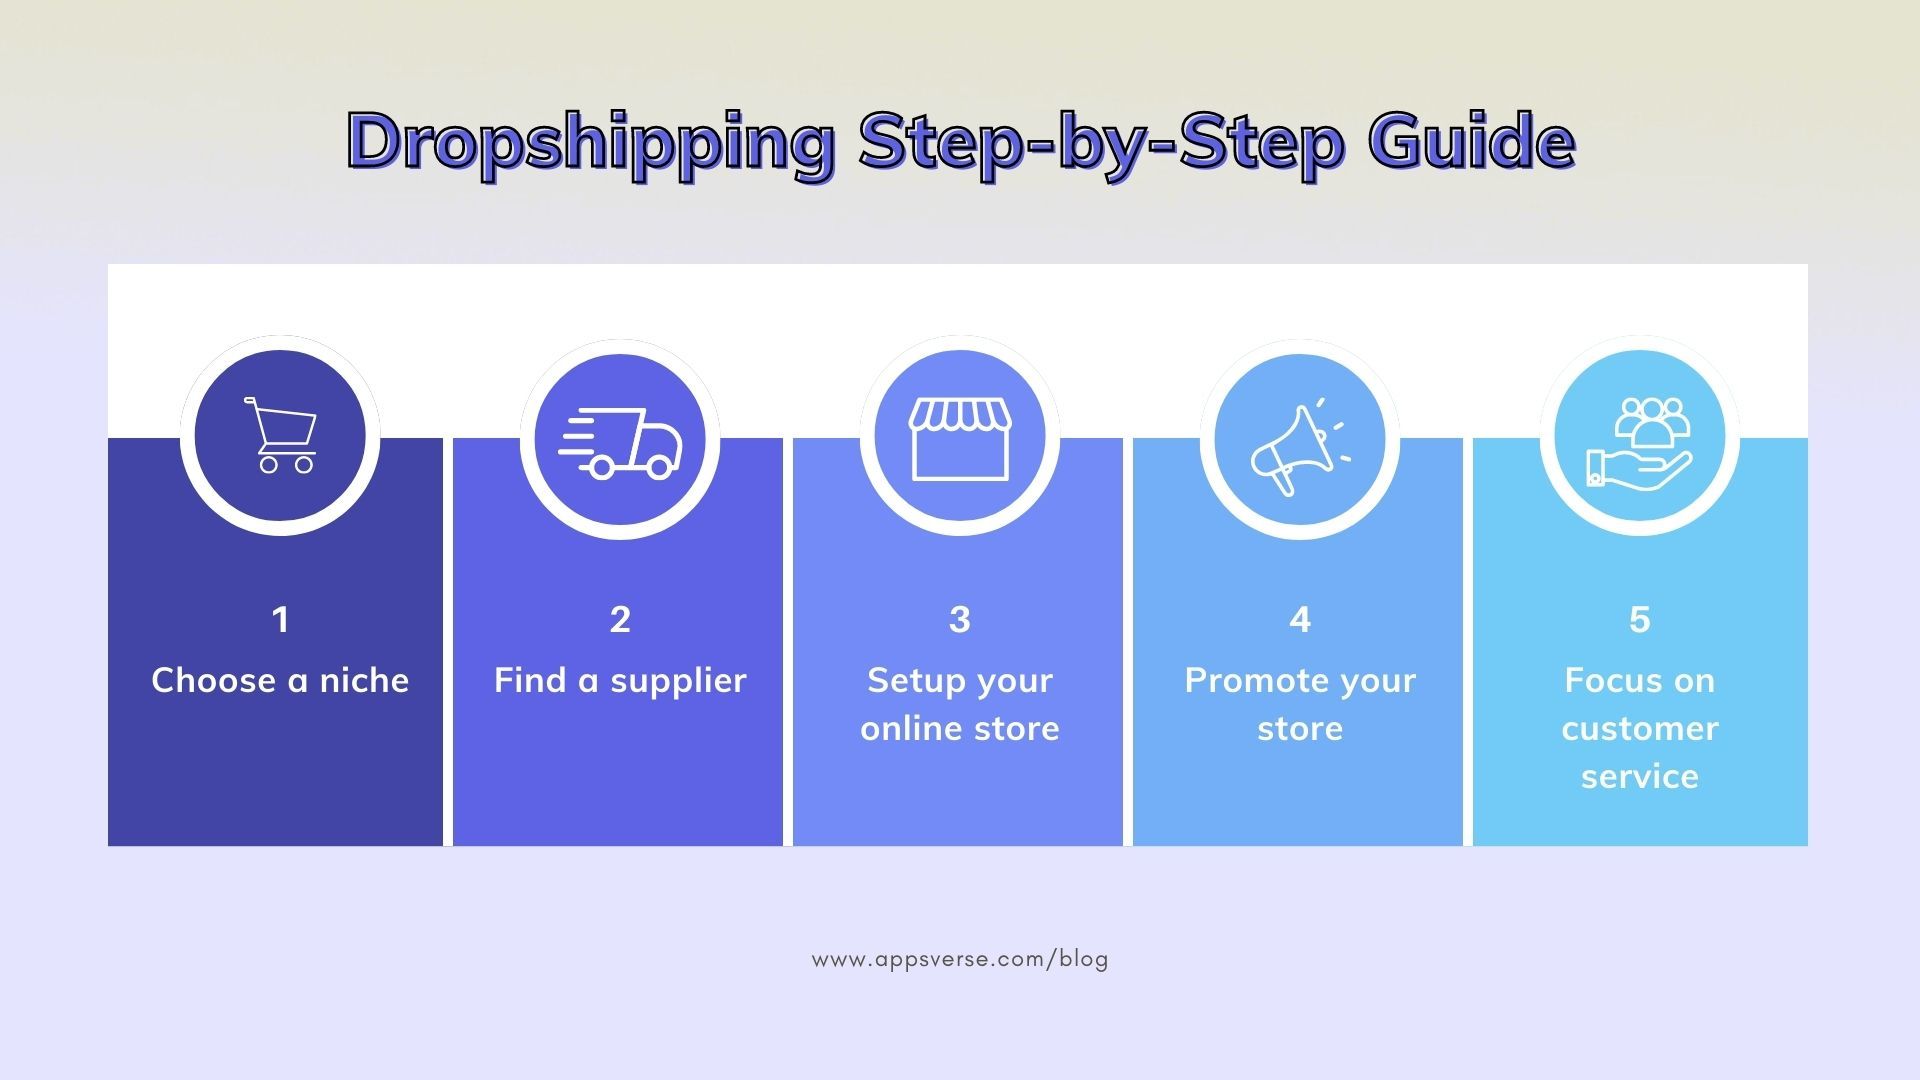 Dropshipping With No Money: A Step-by-Step Guide to Starting a Business